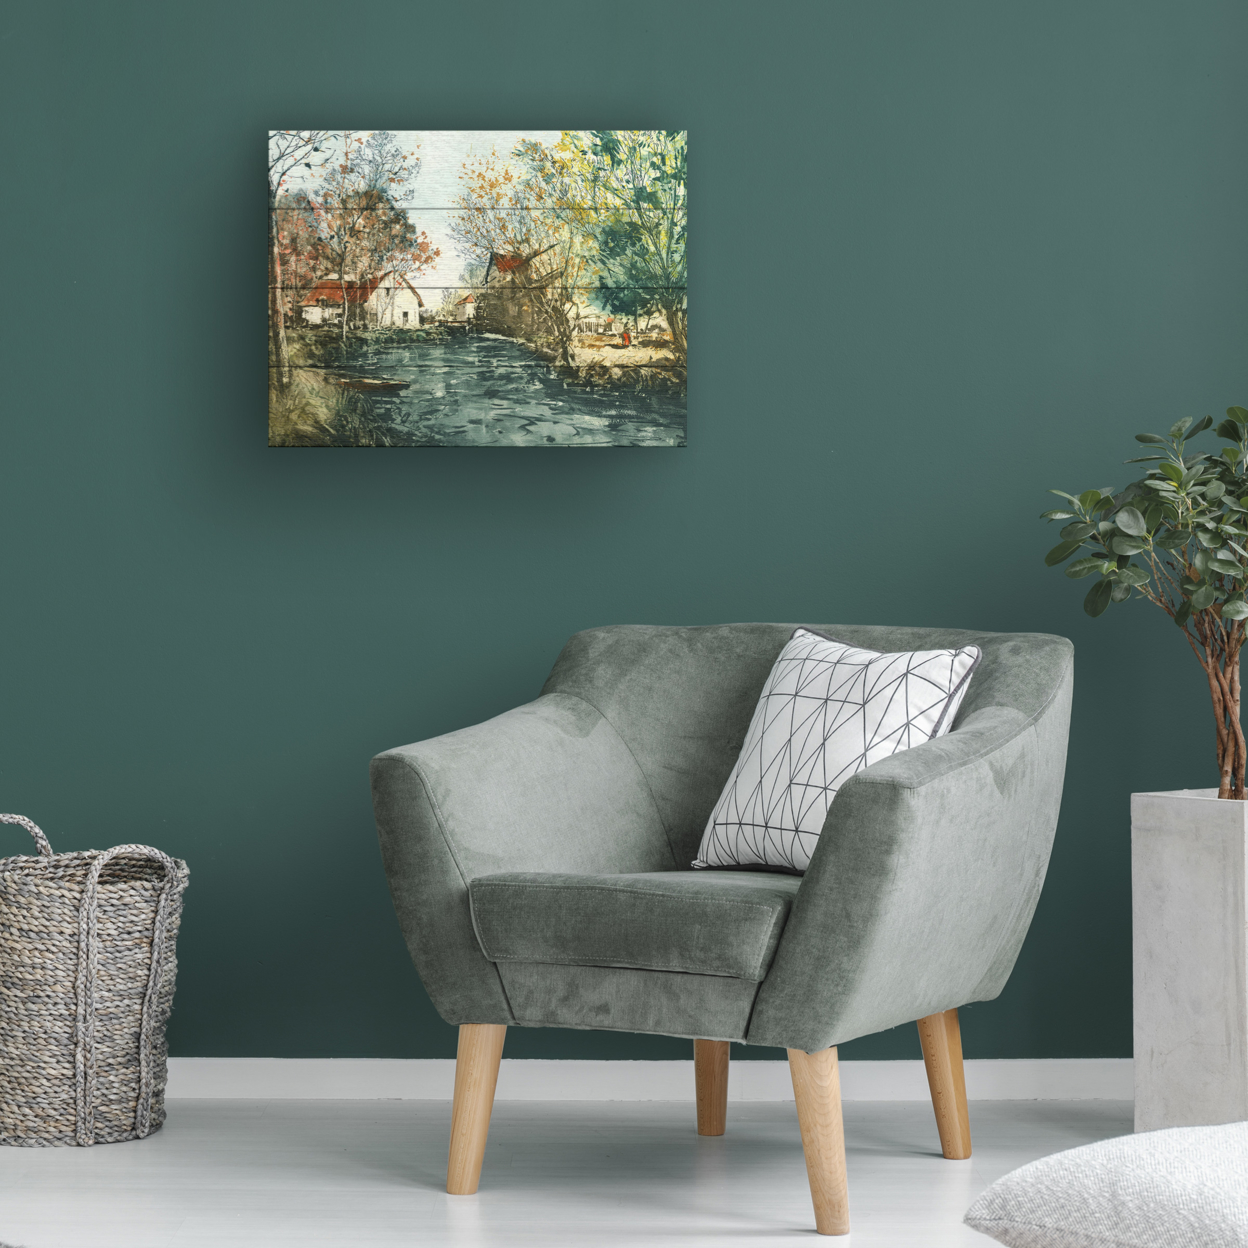 Wall Art 12 X 16 Inches Titled Autumn Landscape Iii Ready To Hang Printed On Wooden Planks